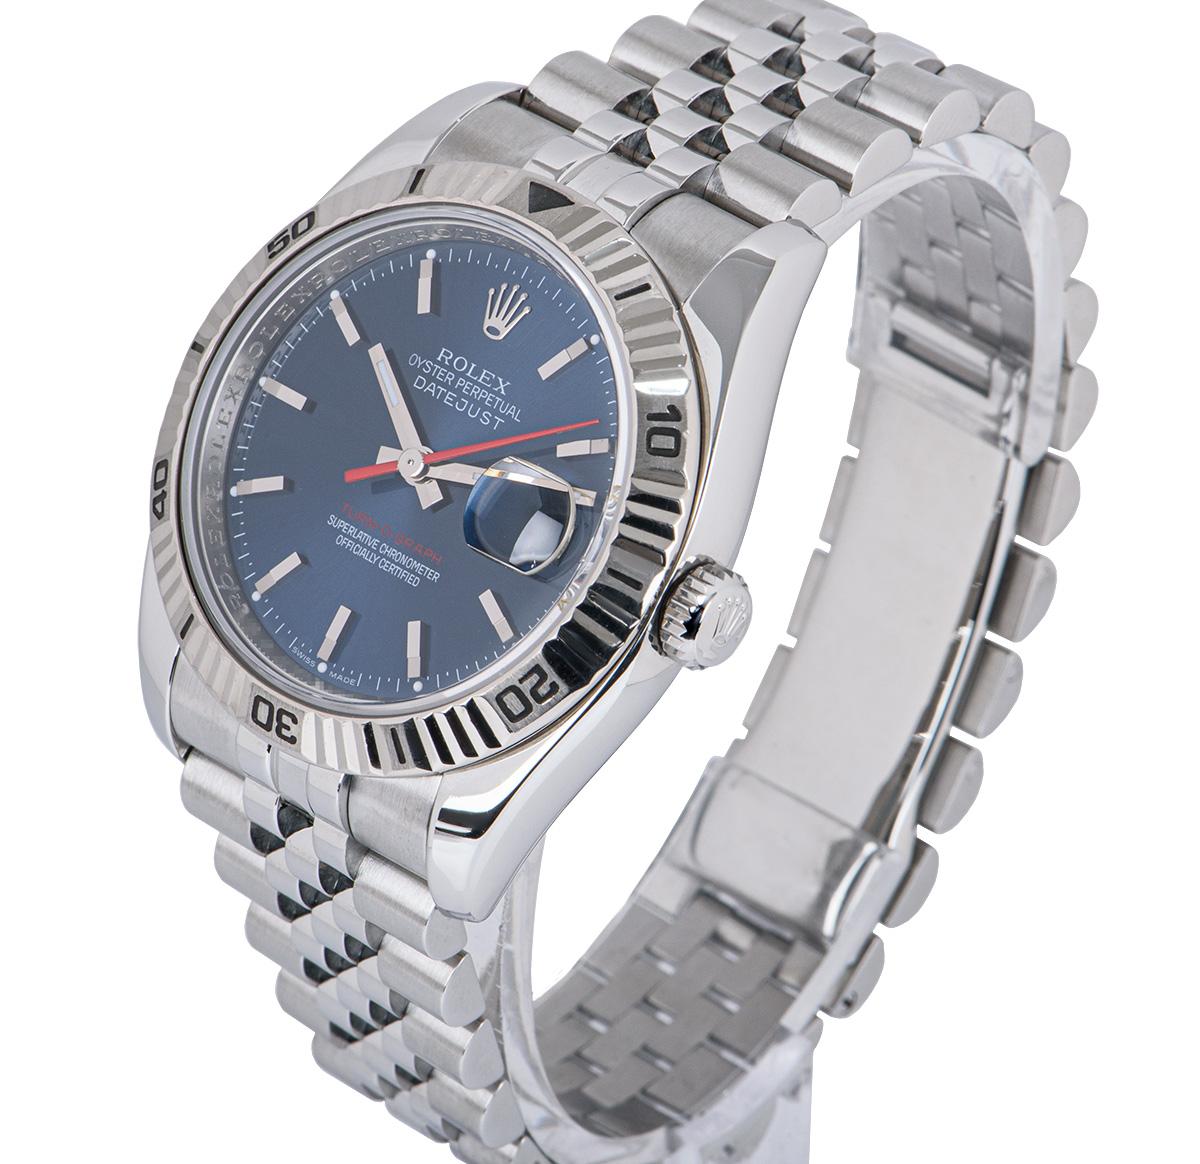 A 36 mm Stainless Steel Oyster Perpetual Datejust Turn-O-Graph Gents Wristwatch, blue dial with applied hour markers, date at 3 0'clock, an 18k white gold bi-directional rotatable fluted bezel with 60 minute graduations, a stainless steel jubilee